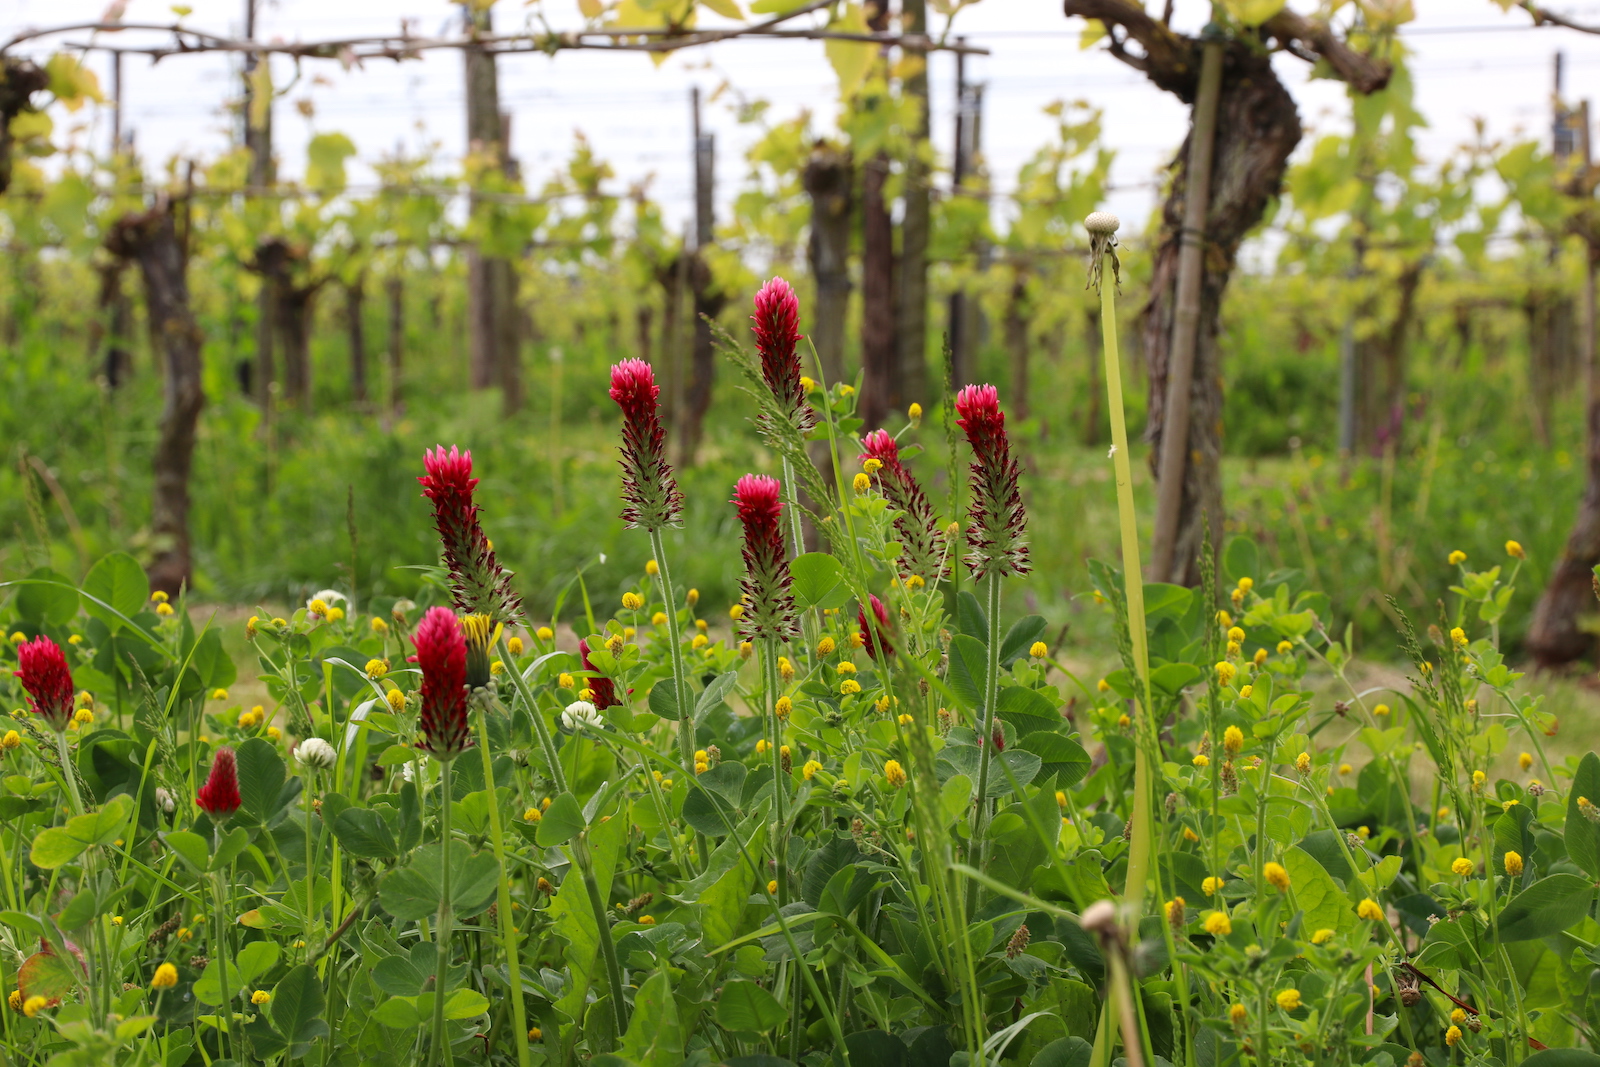 The sustainable wine growing practices of Betuws Wijndomein also results in colorful vineyards.